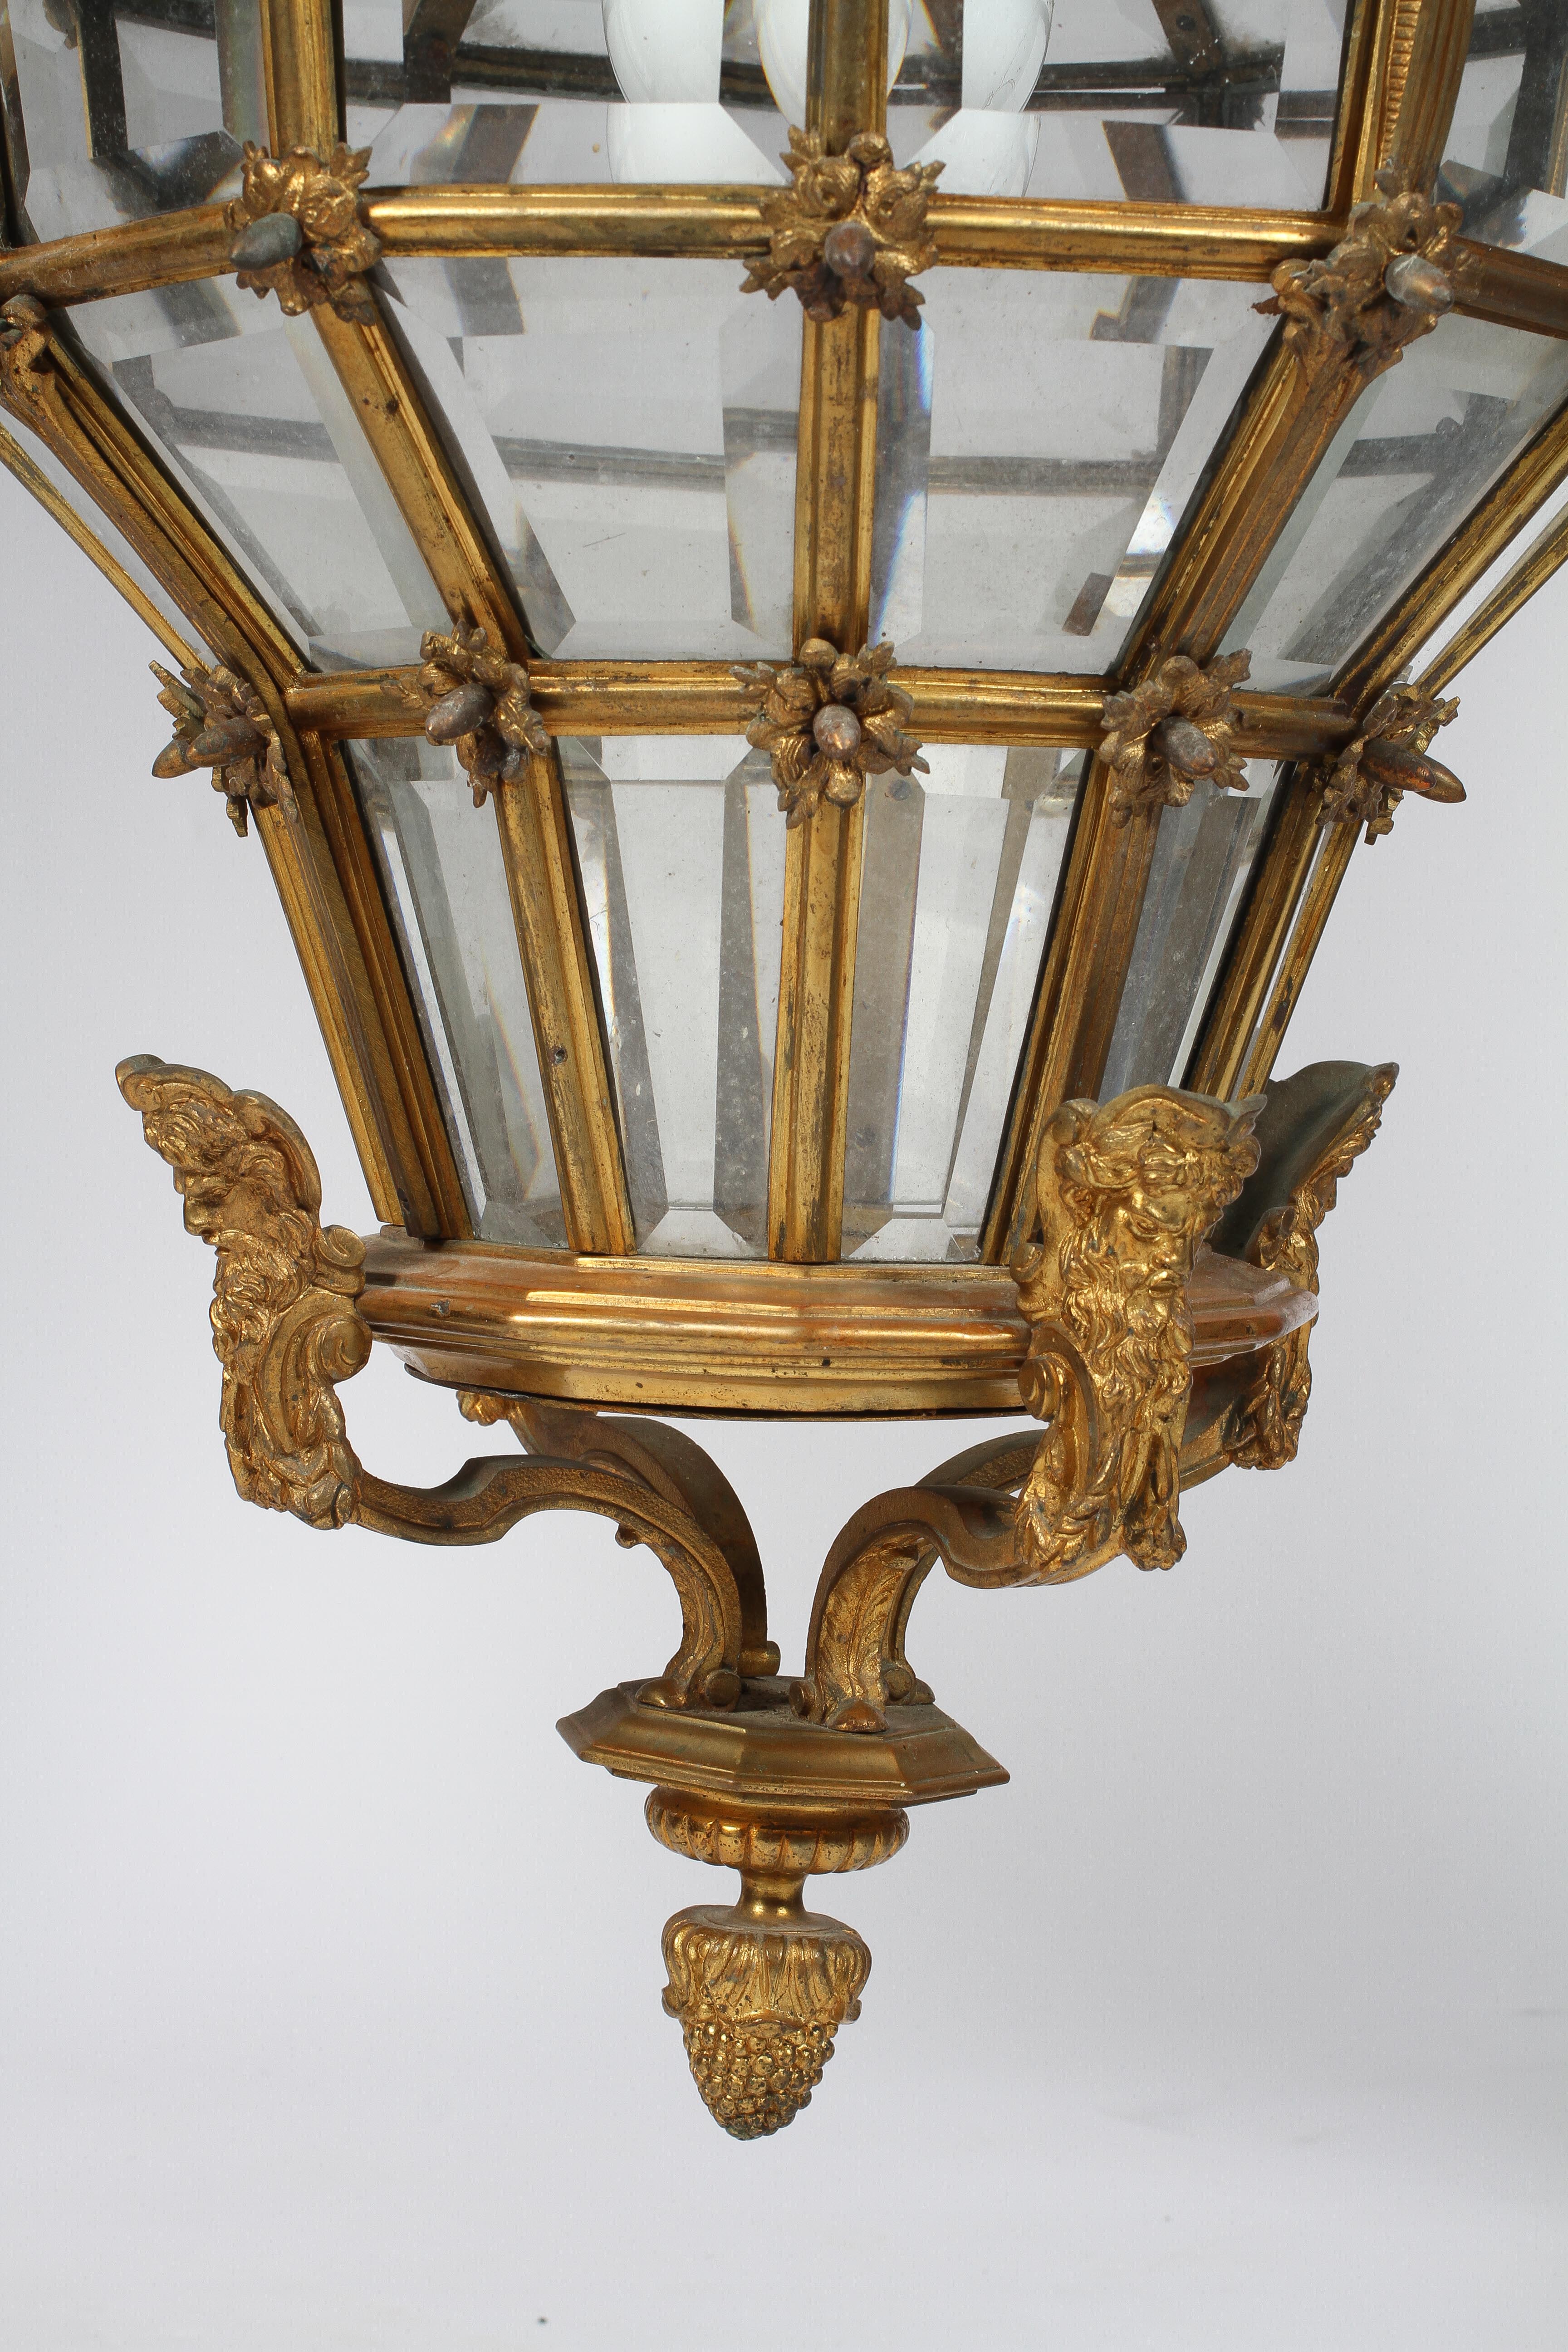 A French ormolu ceiling lantern, possibly late 19th century, of dodecahedral form, - Image 2 of 14